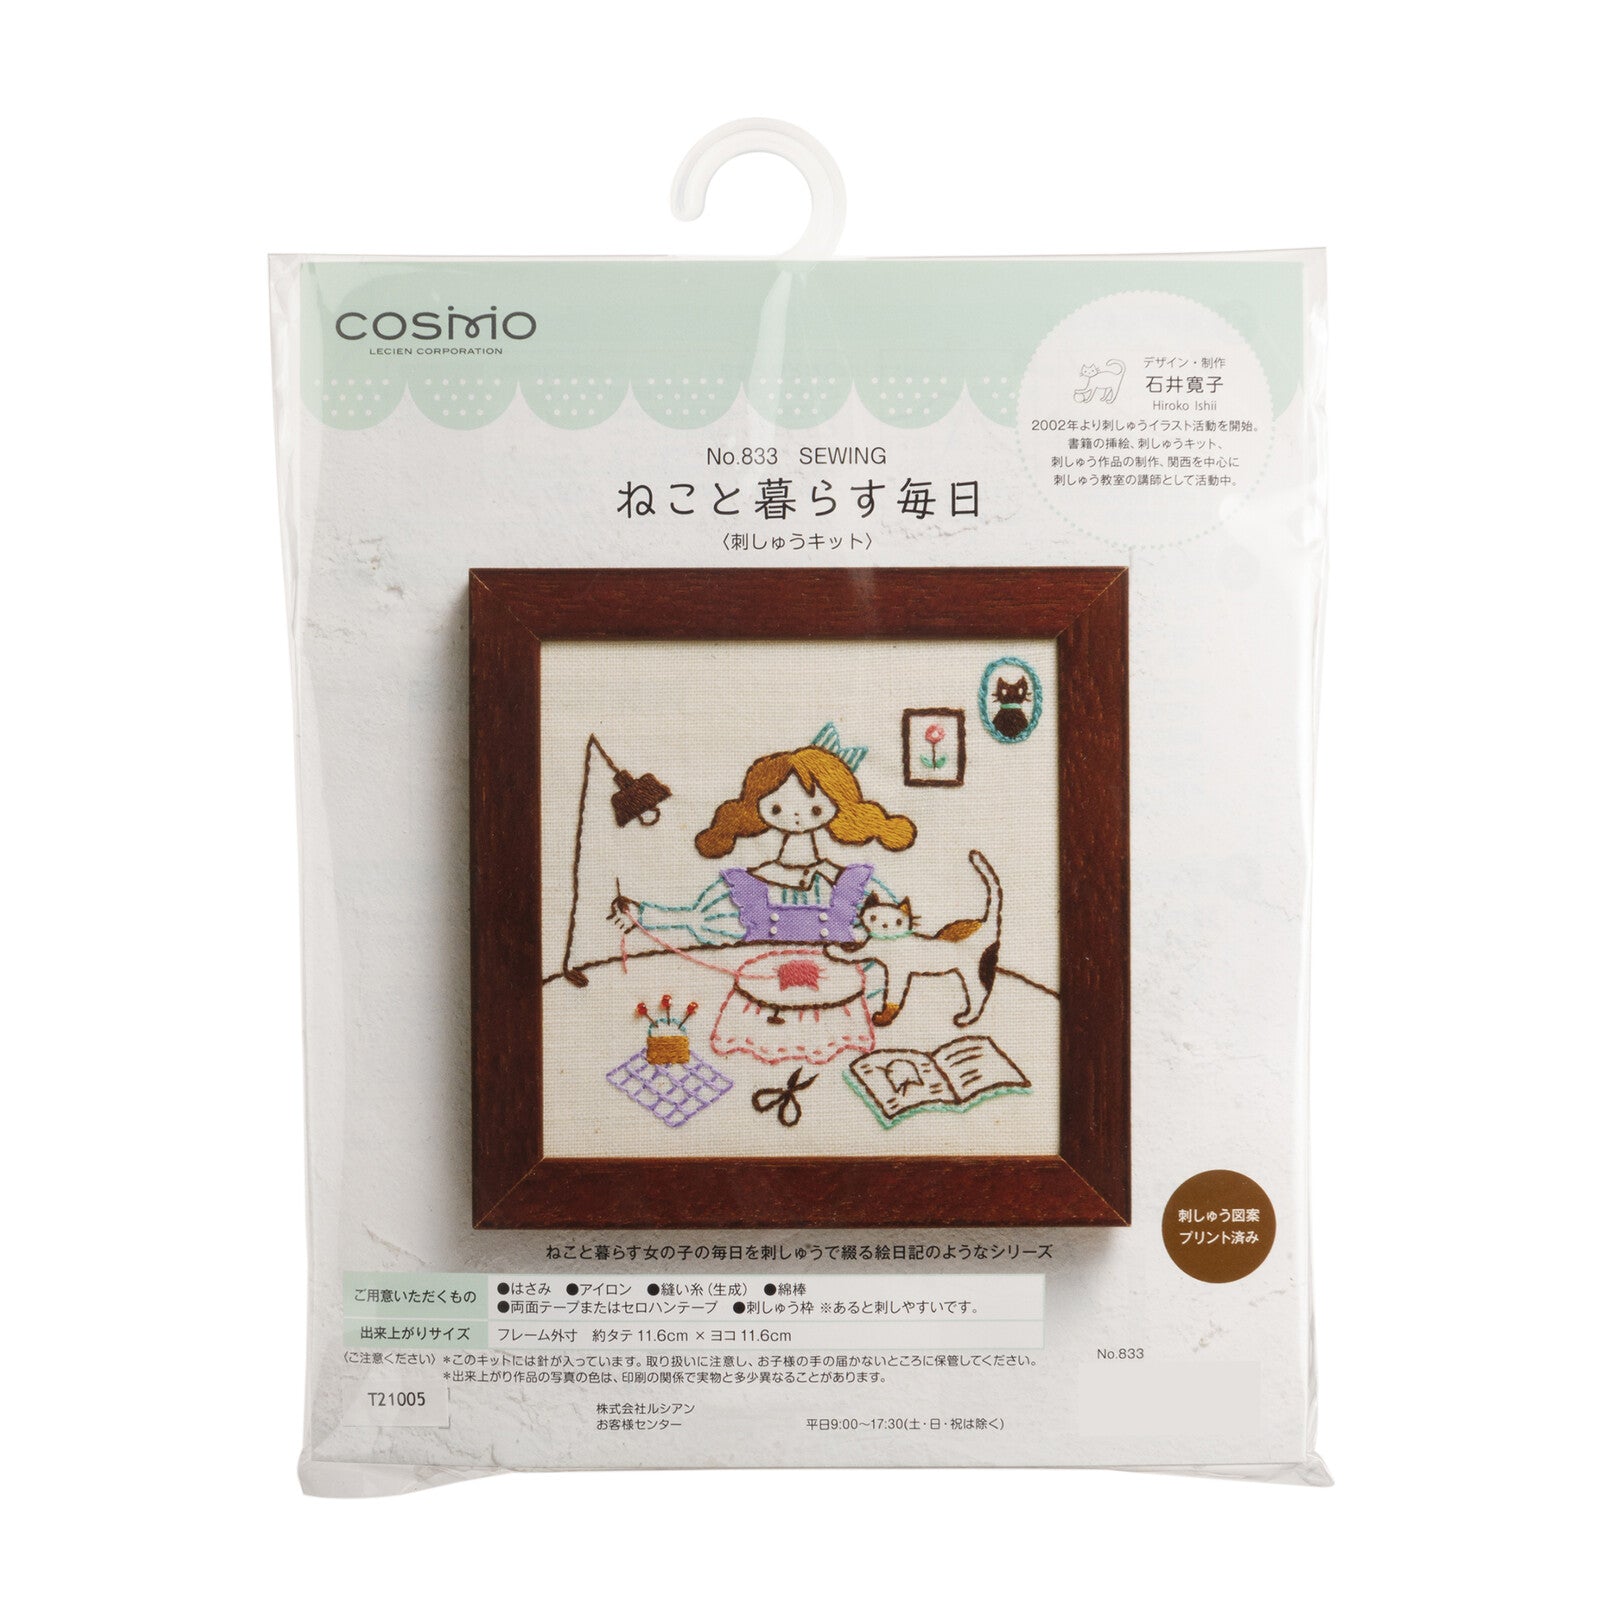 Cat Embroidery Kit 'cat on Cushions' Modern Hand Embroidery Craft Kit  Materials Included 